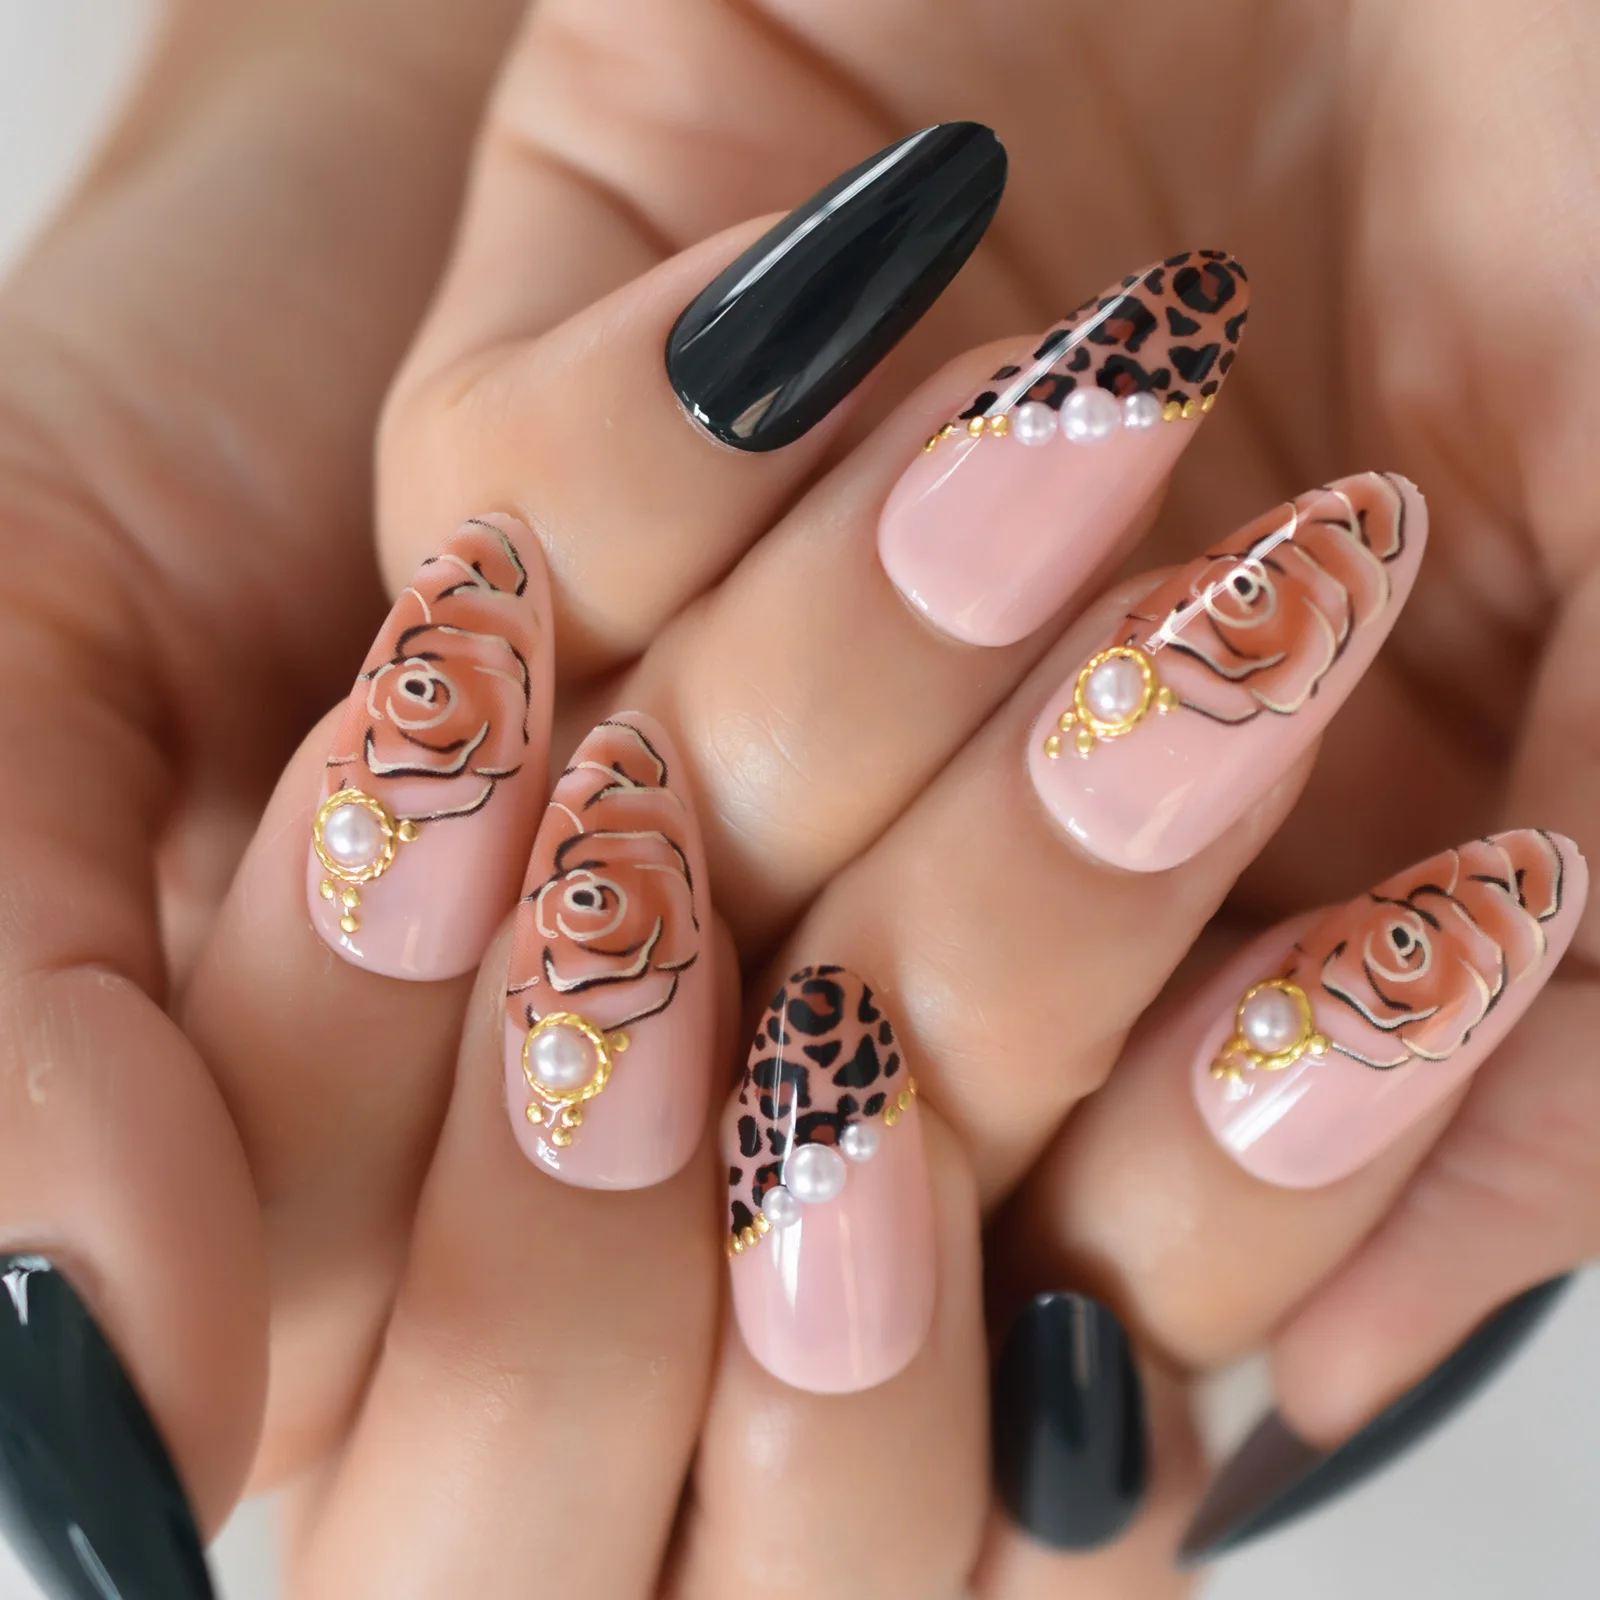 Urban Mermaid Nails - Rose gold and grey leopard print night out nails for  the awesome Karen! 🐆 #rosegoldnails #rosegold #leopardprint  #leopardprintnails #nailart #greynails #thegelbottle #edinburghnails  #nailsedinburgh #edinburghnailtech